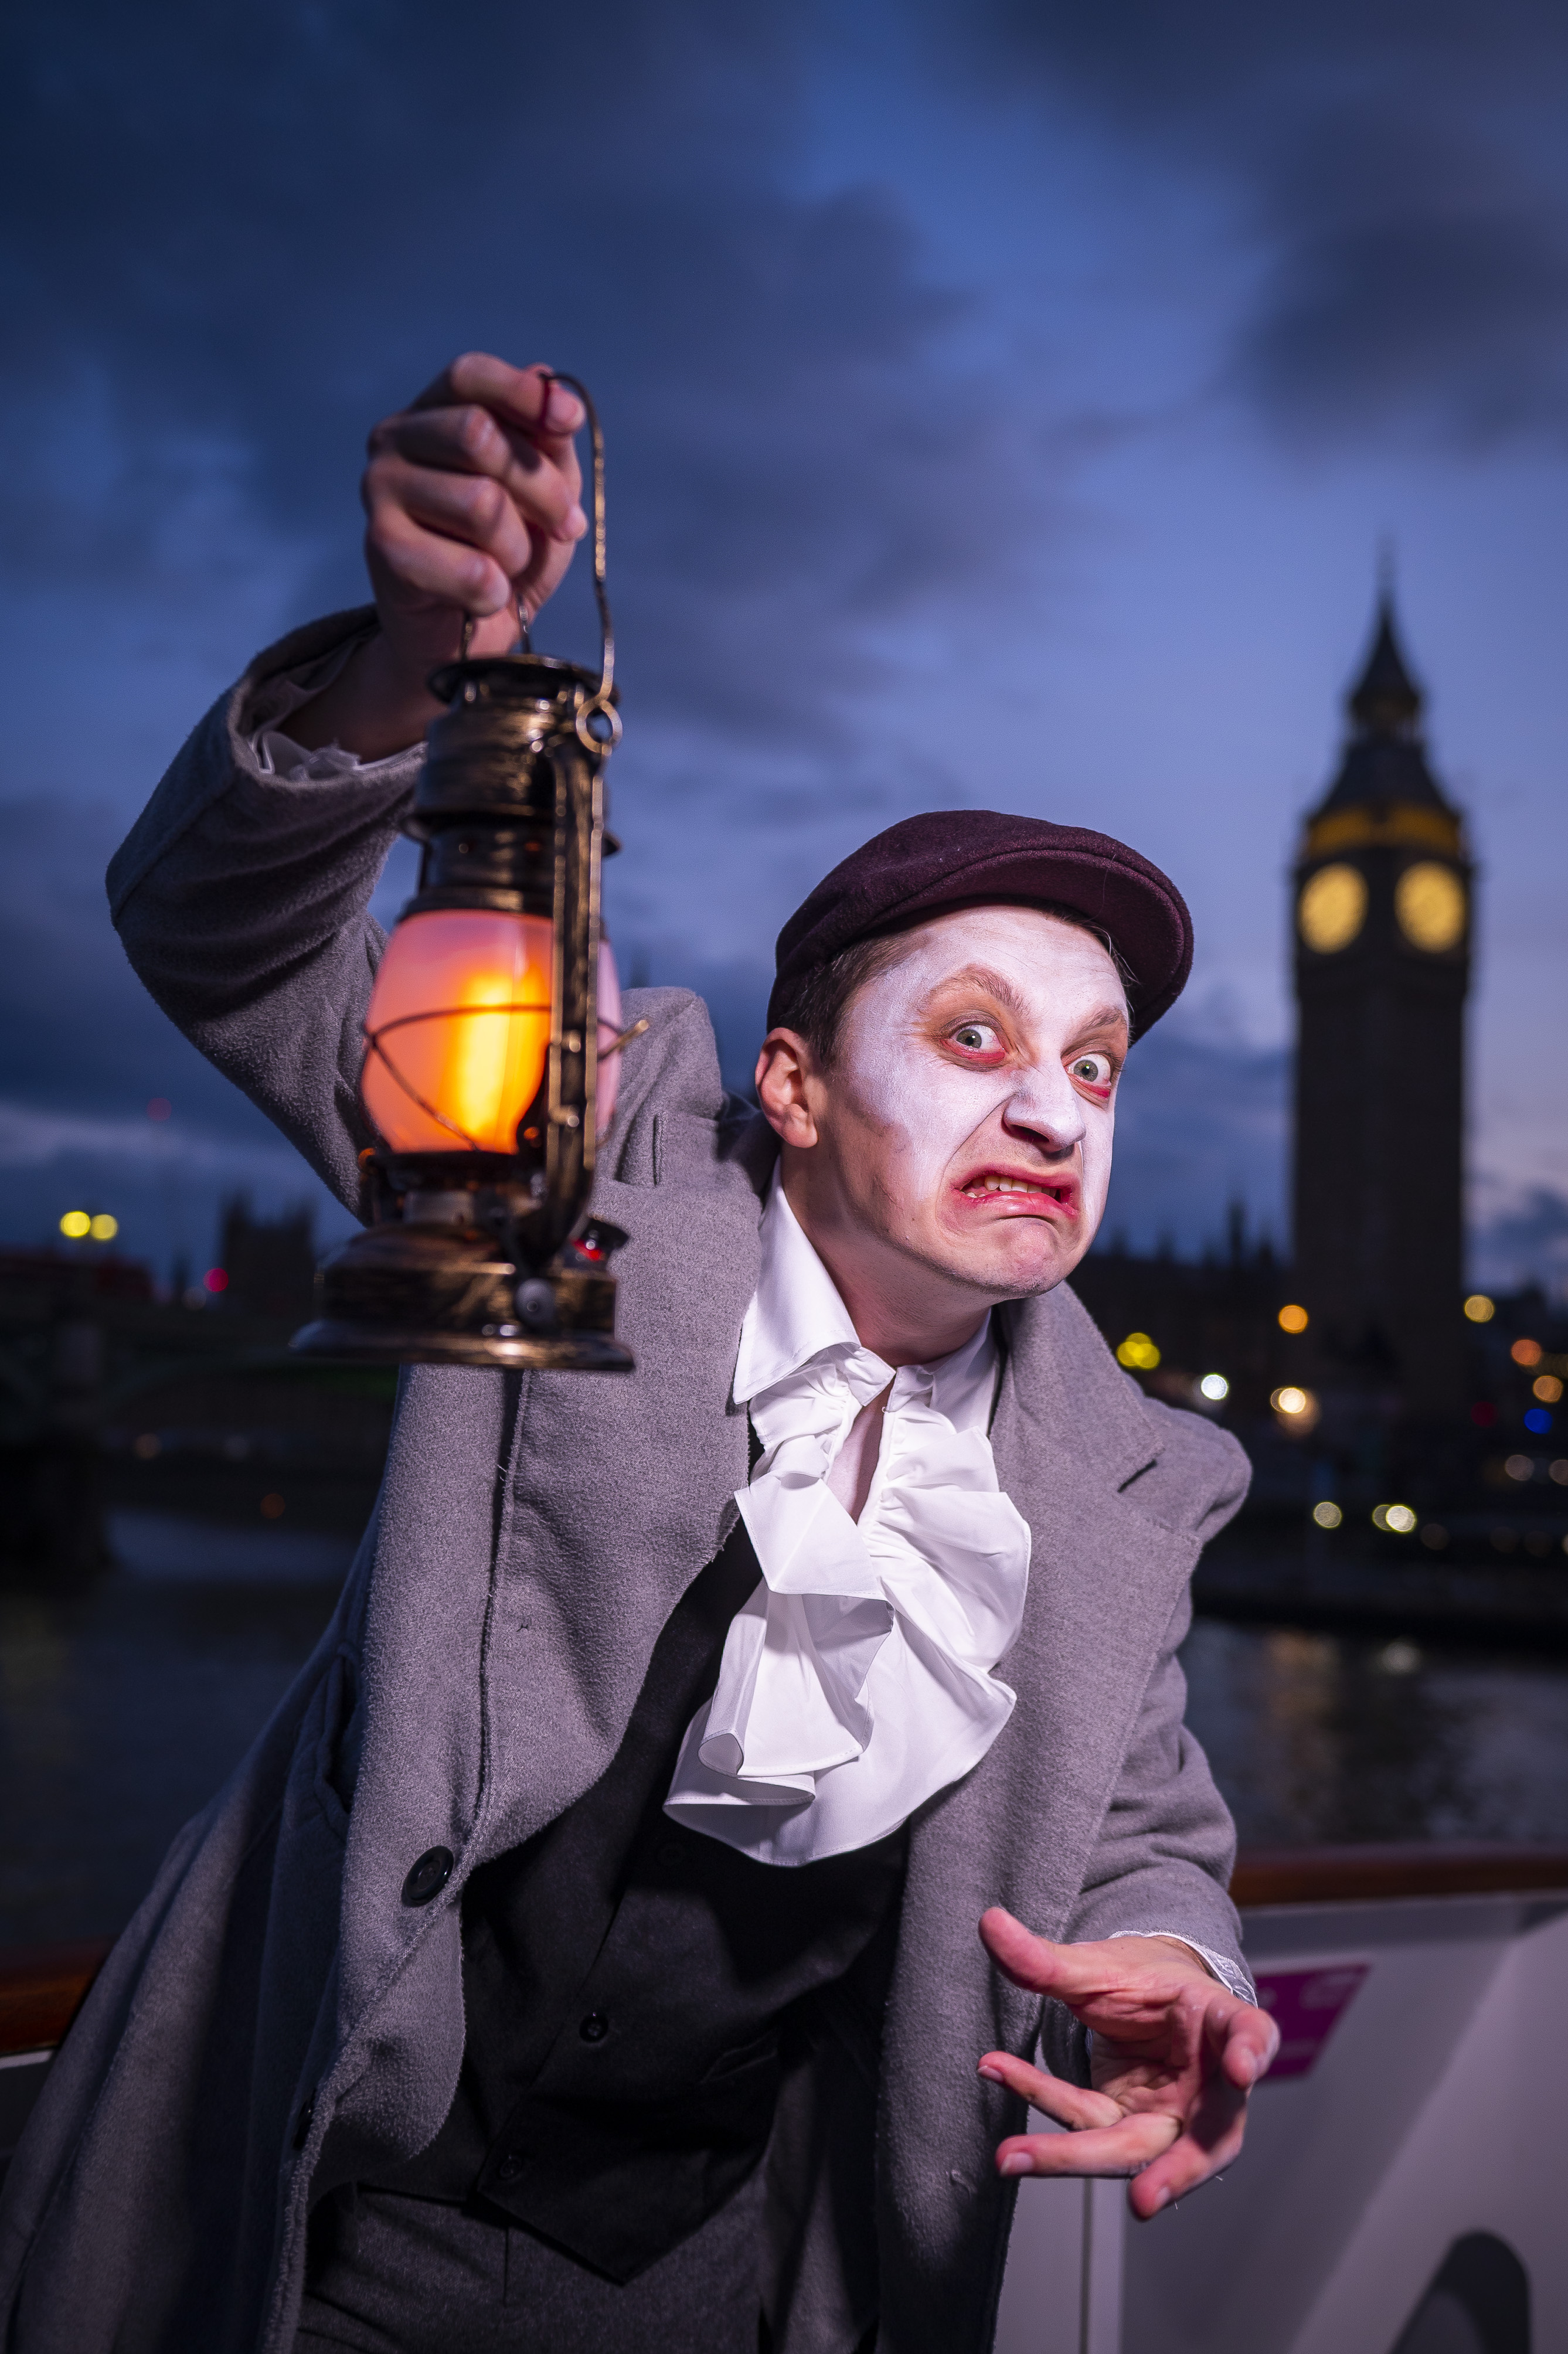 Fright on the thames event at the London Eye